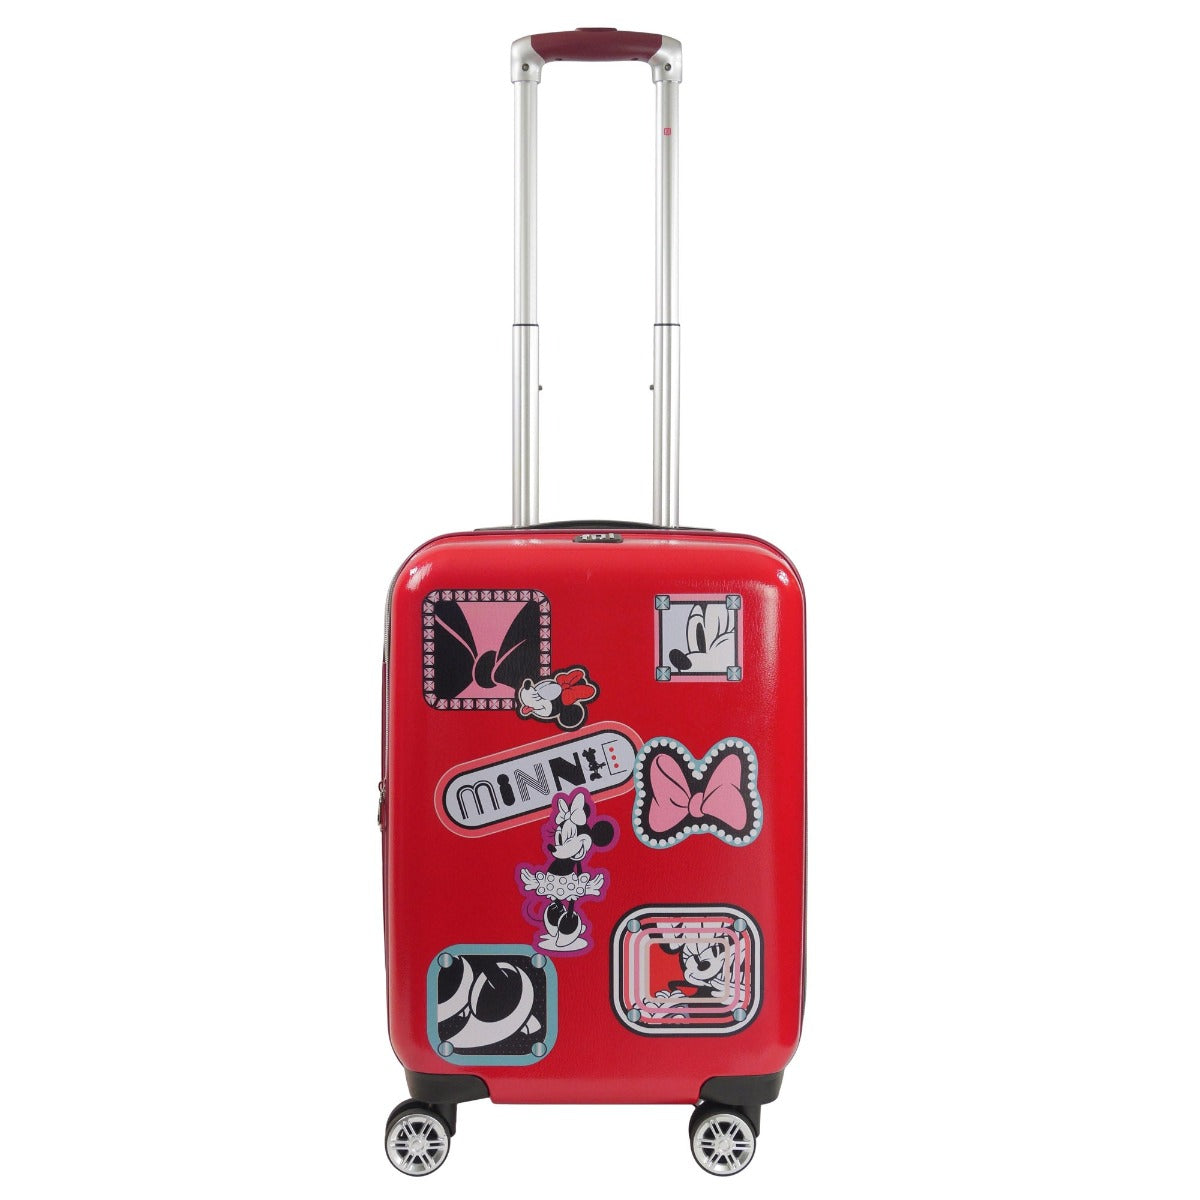 Disney Minnie Mouse Travel Patch 21" Carry-on Hard-sided Spinner Suitcase Luggage Red